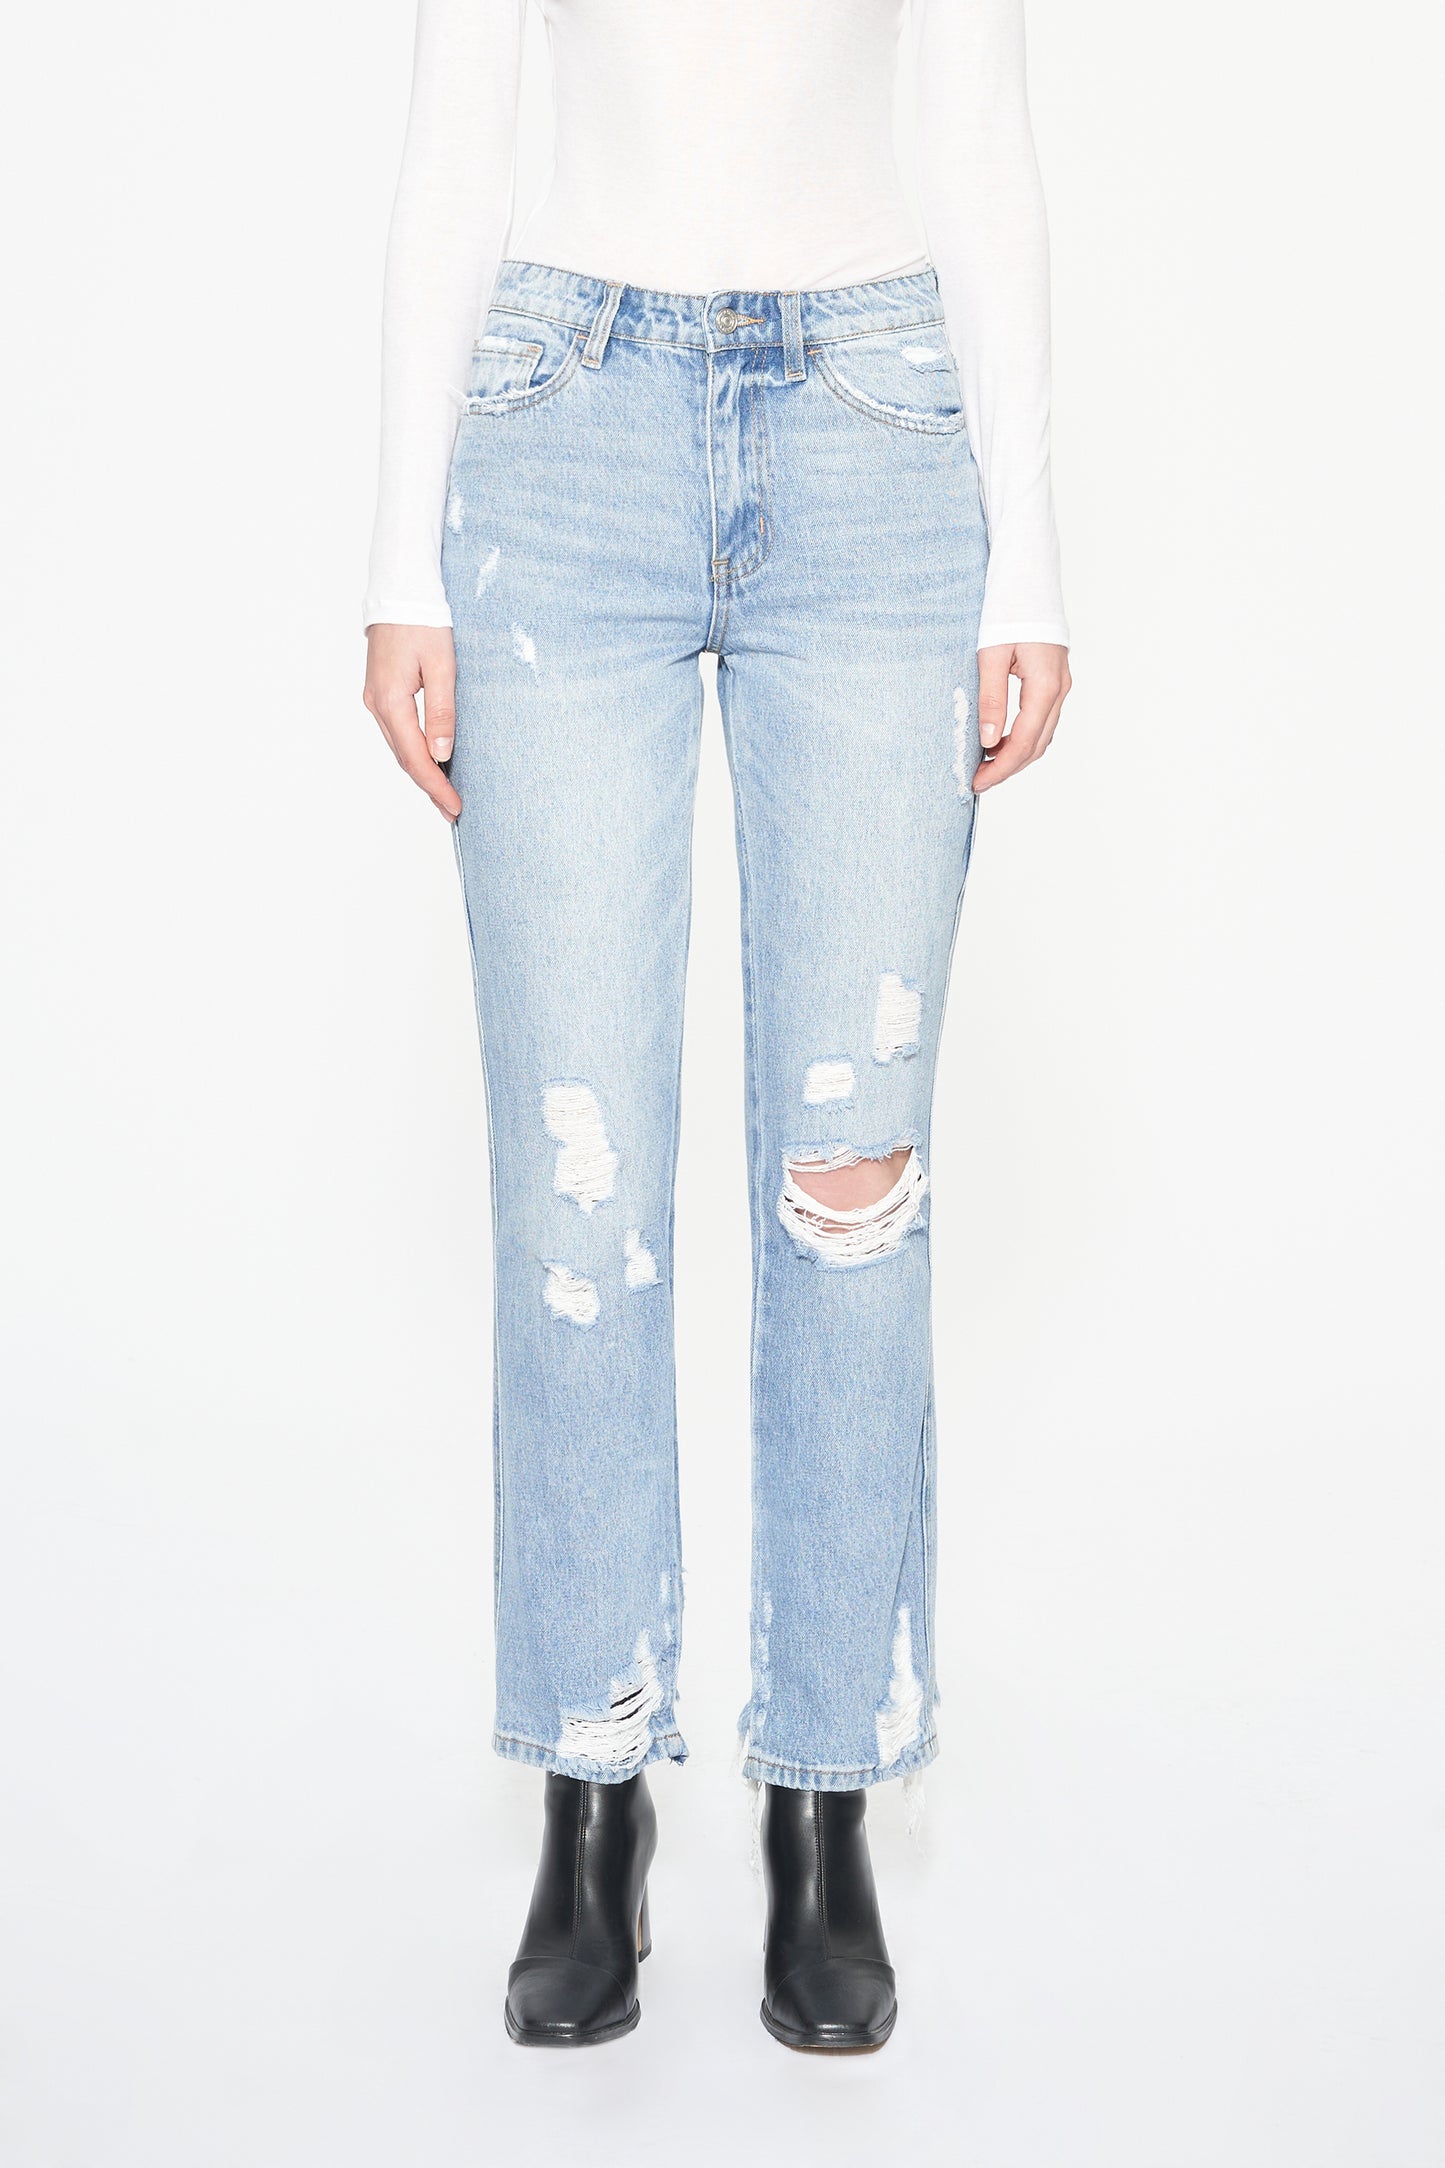 CHRISTINE HIGH RISE DISTRESSED MOM JEANS BYM3063 (4376S) OCEAN